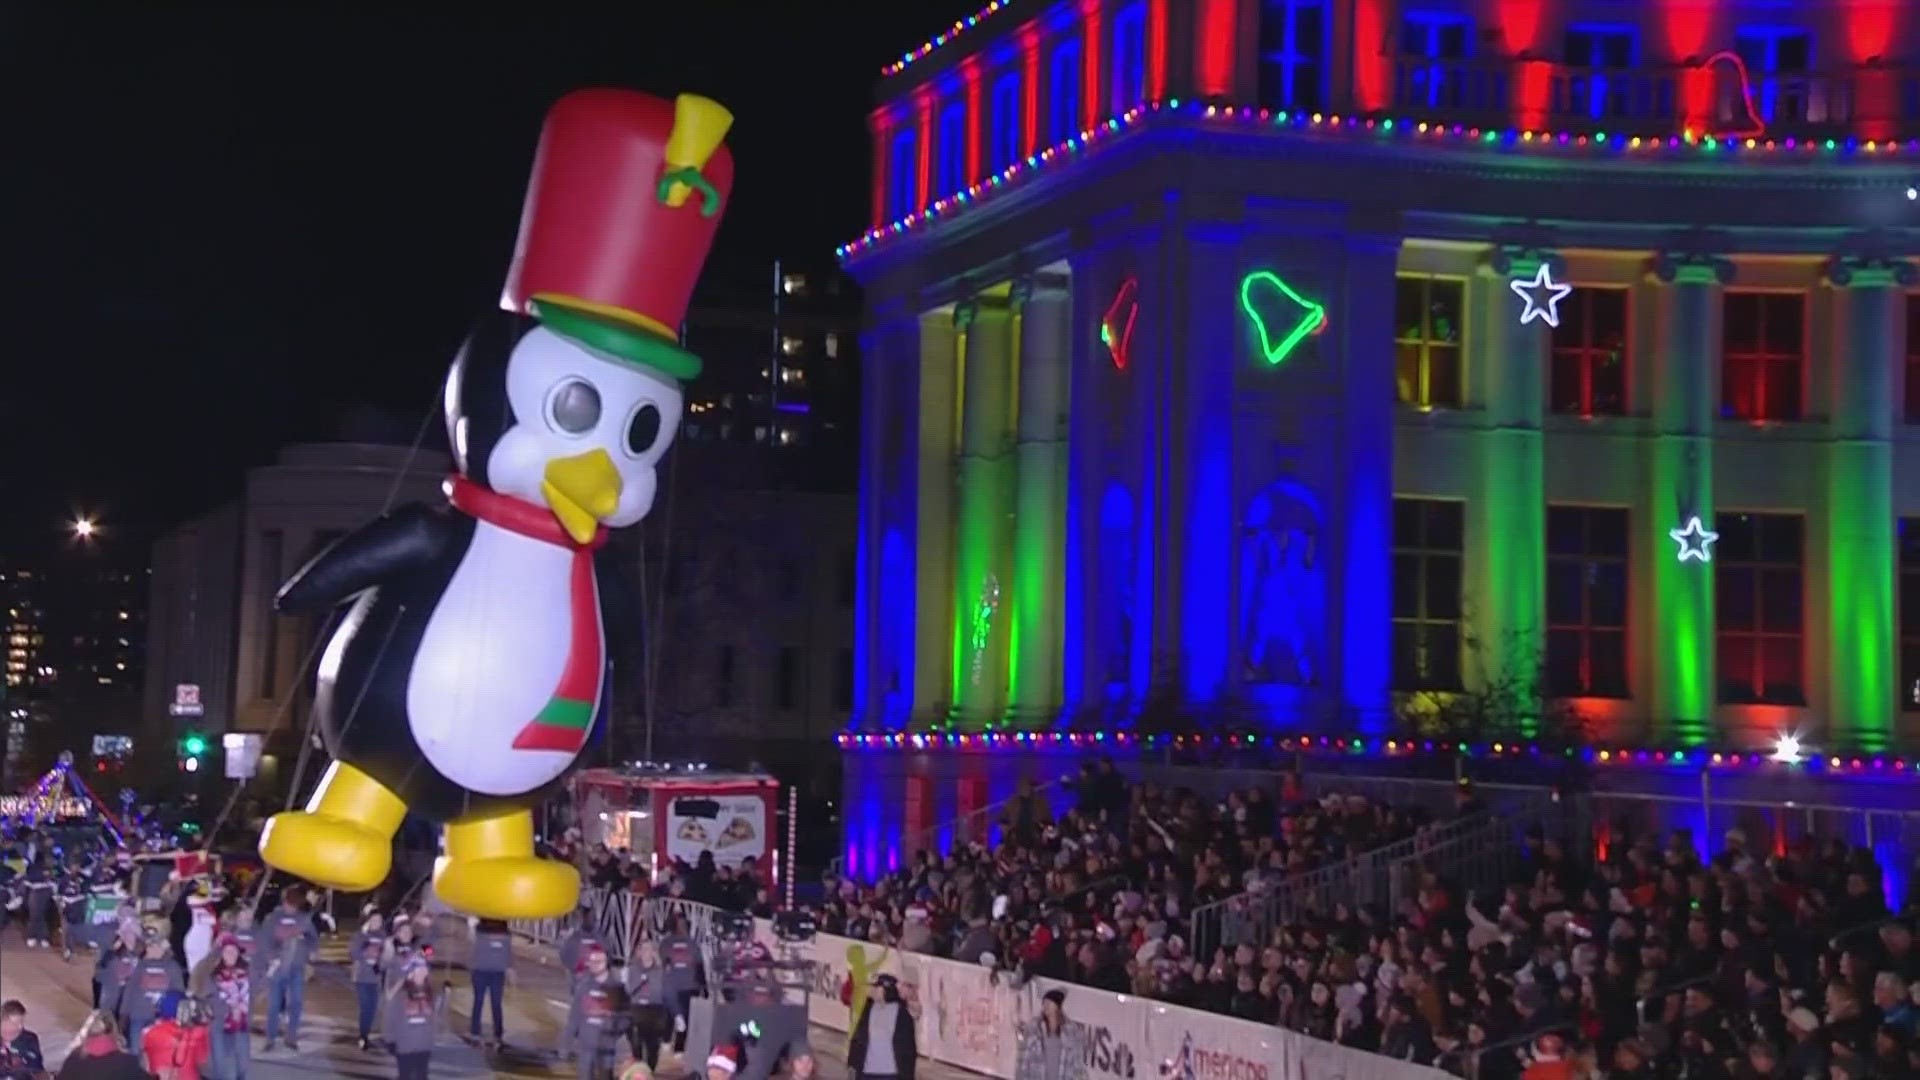 We're just days away from ringing in the holiday season in Denver. Sharon Alton with the Downtown Denver Partnership joins us to preview the 9NEWS Parade of Lights.